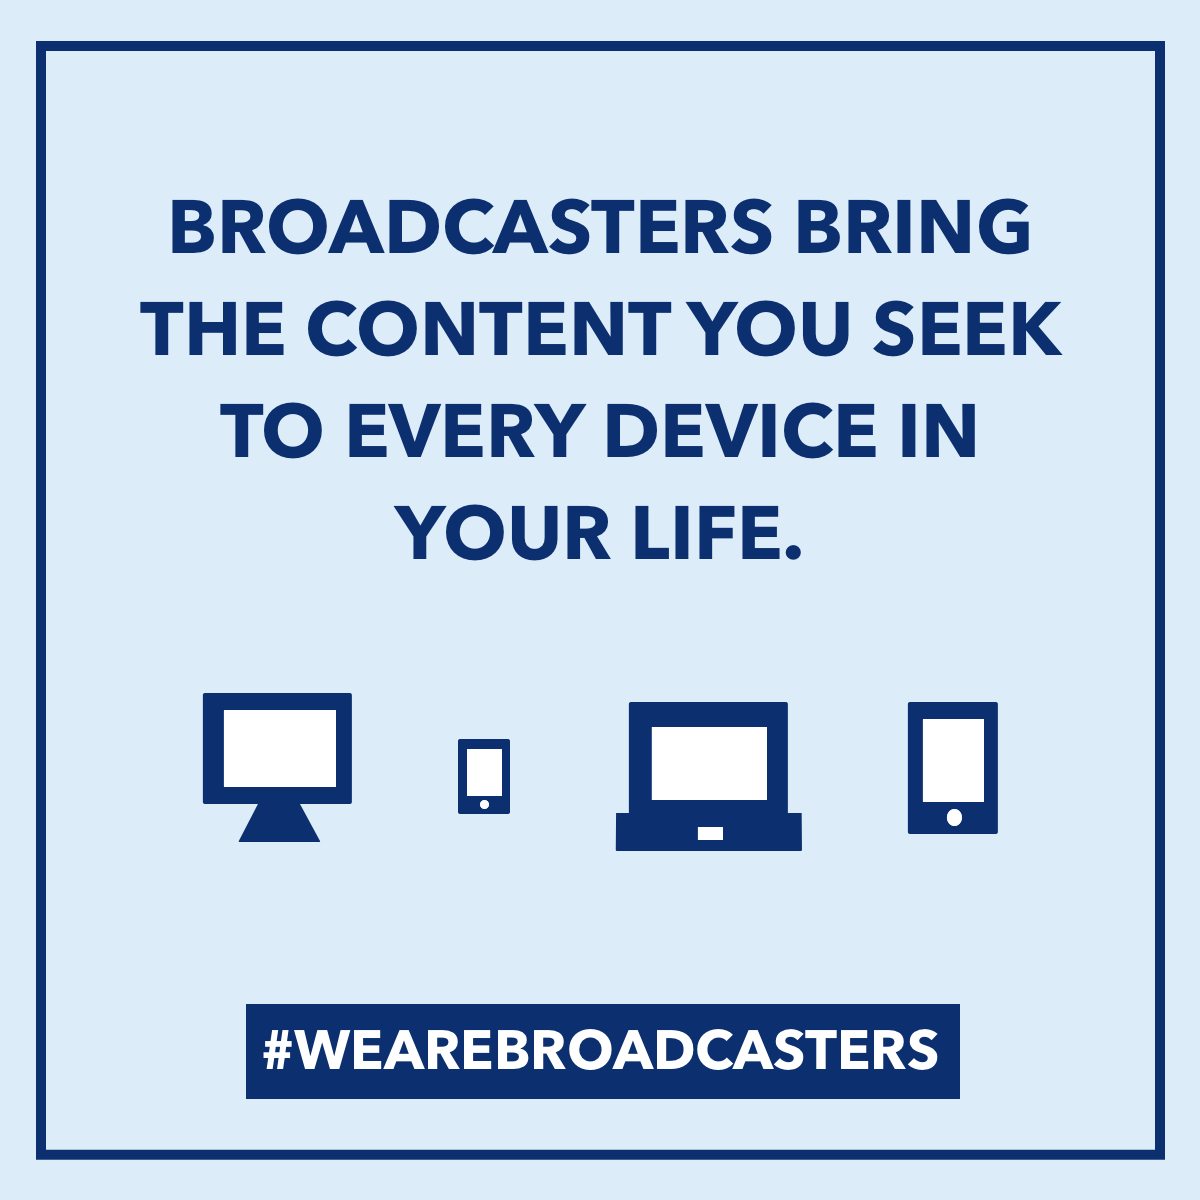 Broadcasters bring the content you seek to every device in your life